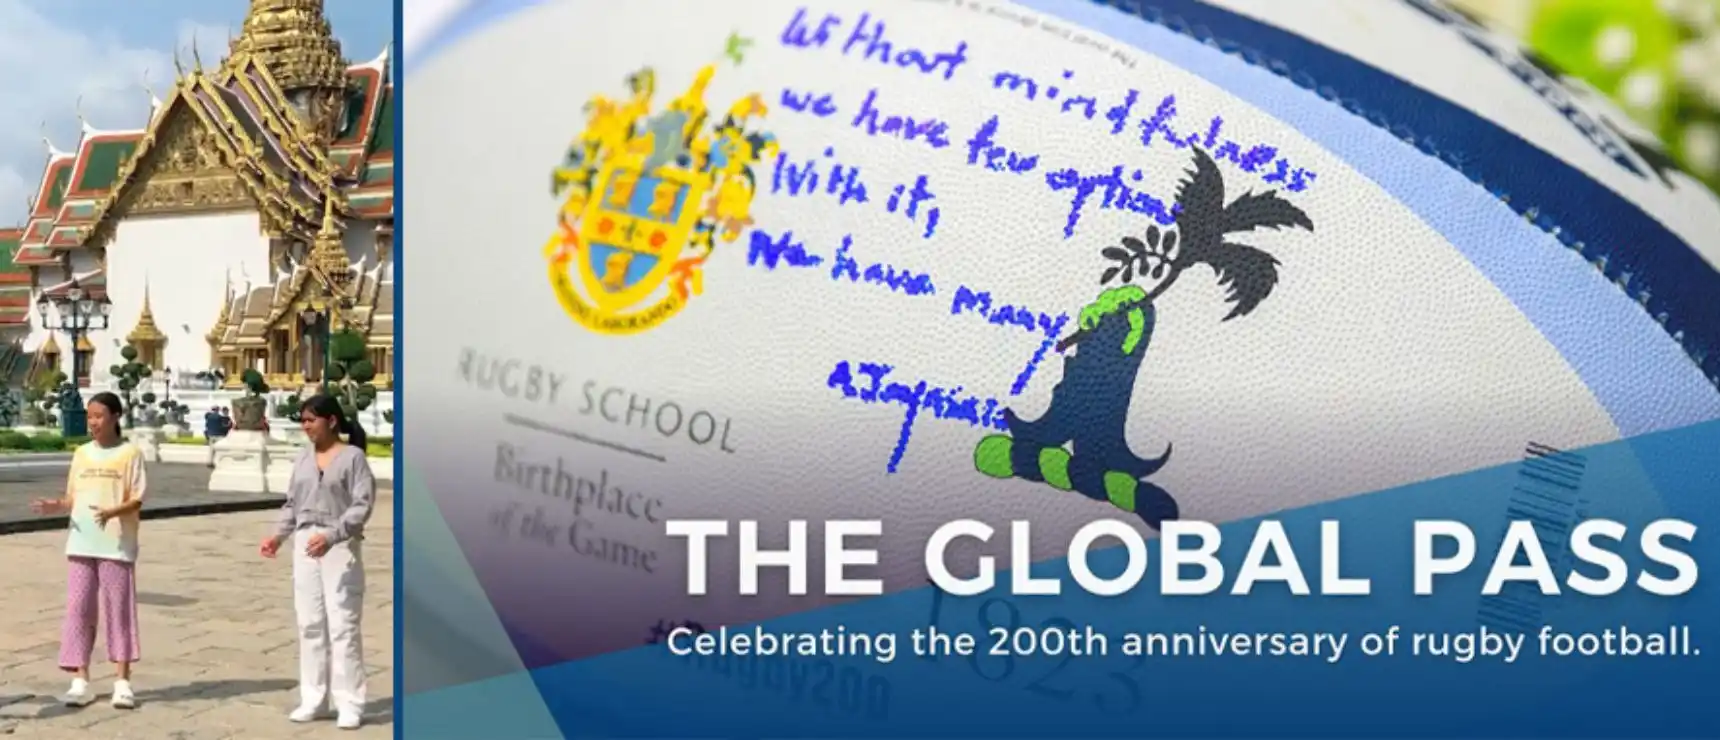 Celebrating 200 Years of Rugby - From Rugby School to the World - 6 Celebrating 200 Years of Rugby - From Rugby School to the World - 6 Celebrating 200 Years of Rugby: From Rugby School to the World